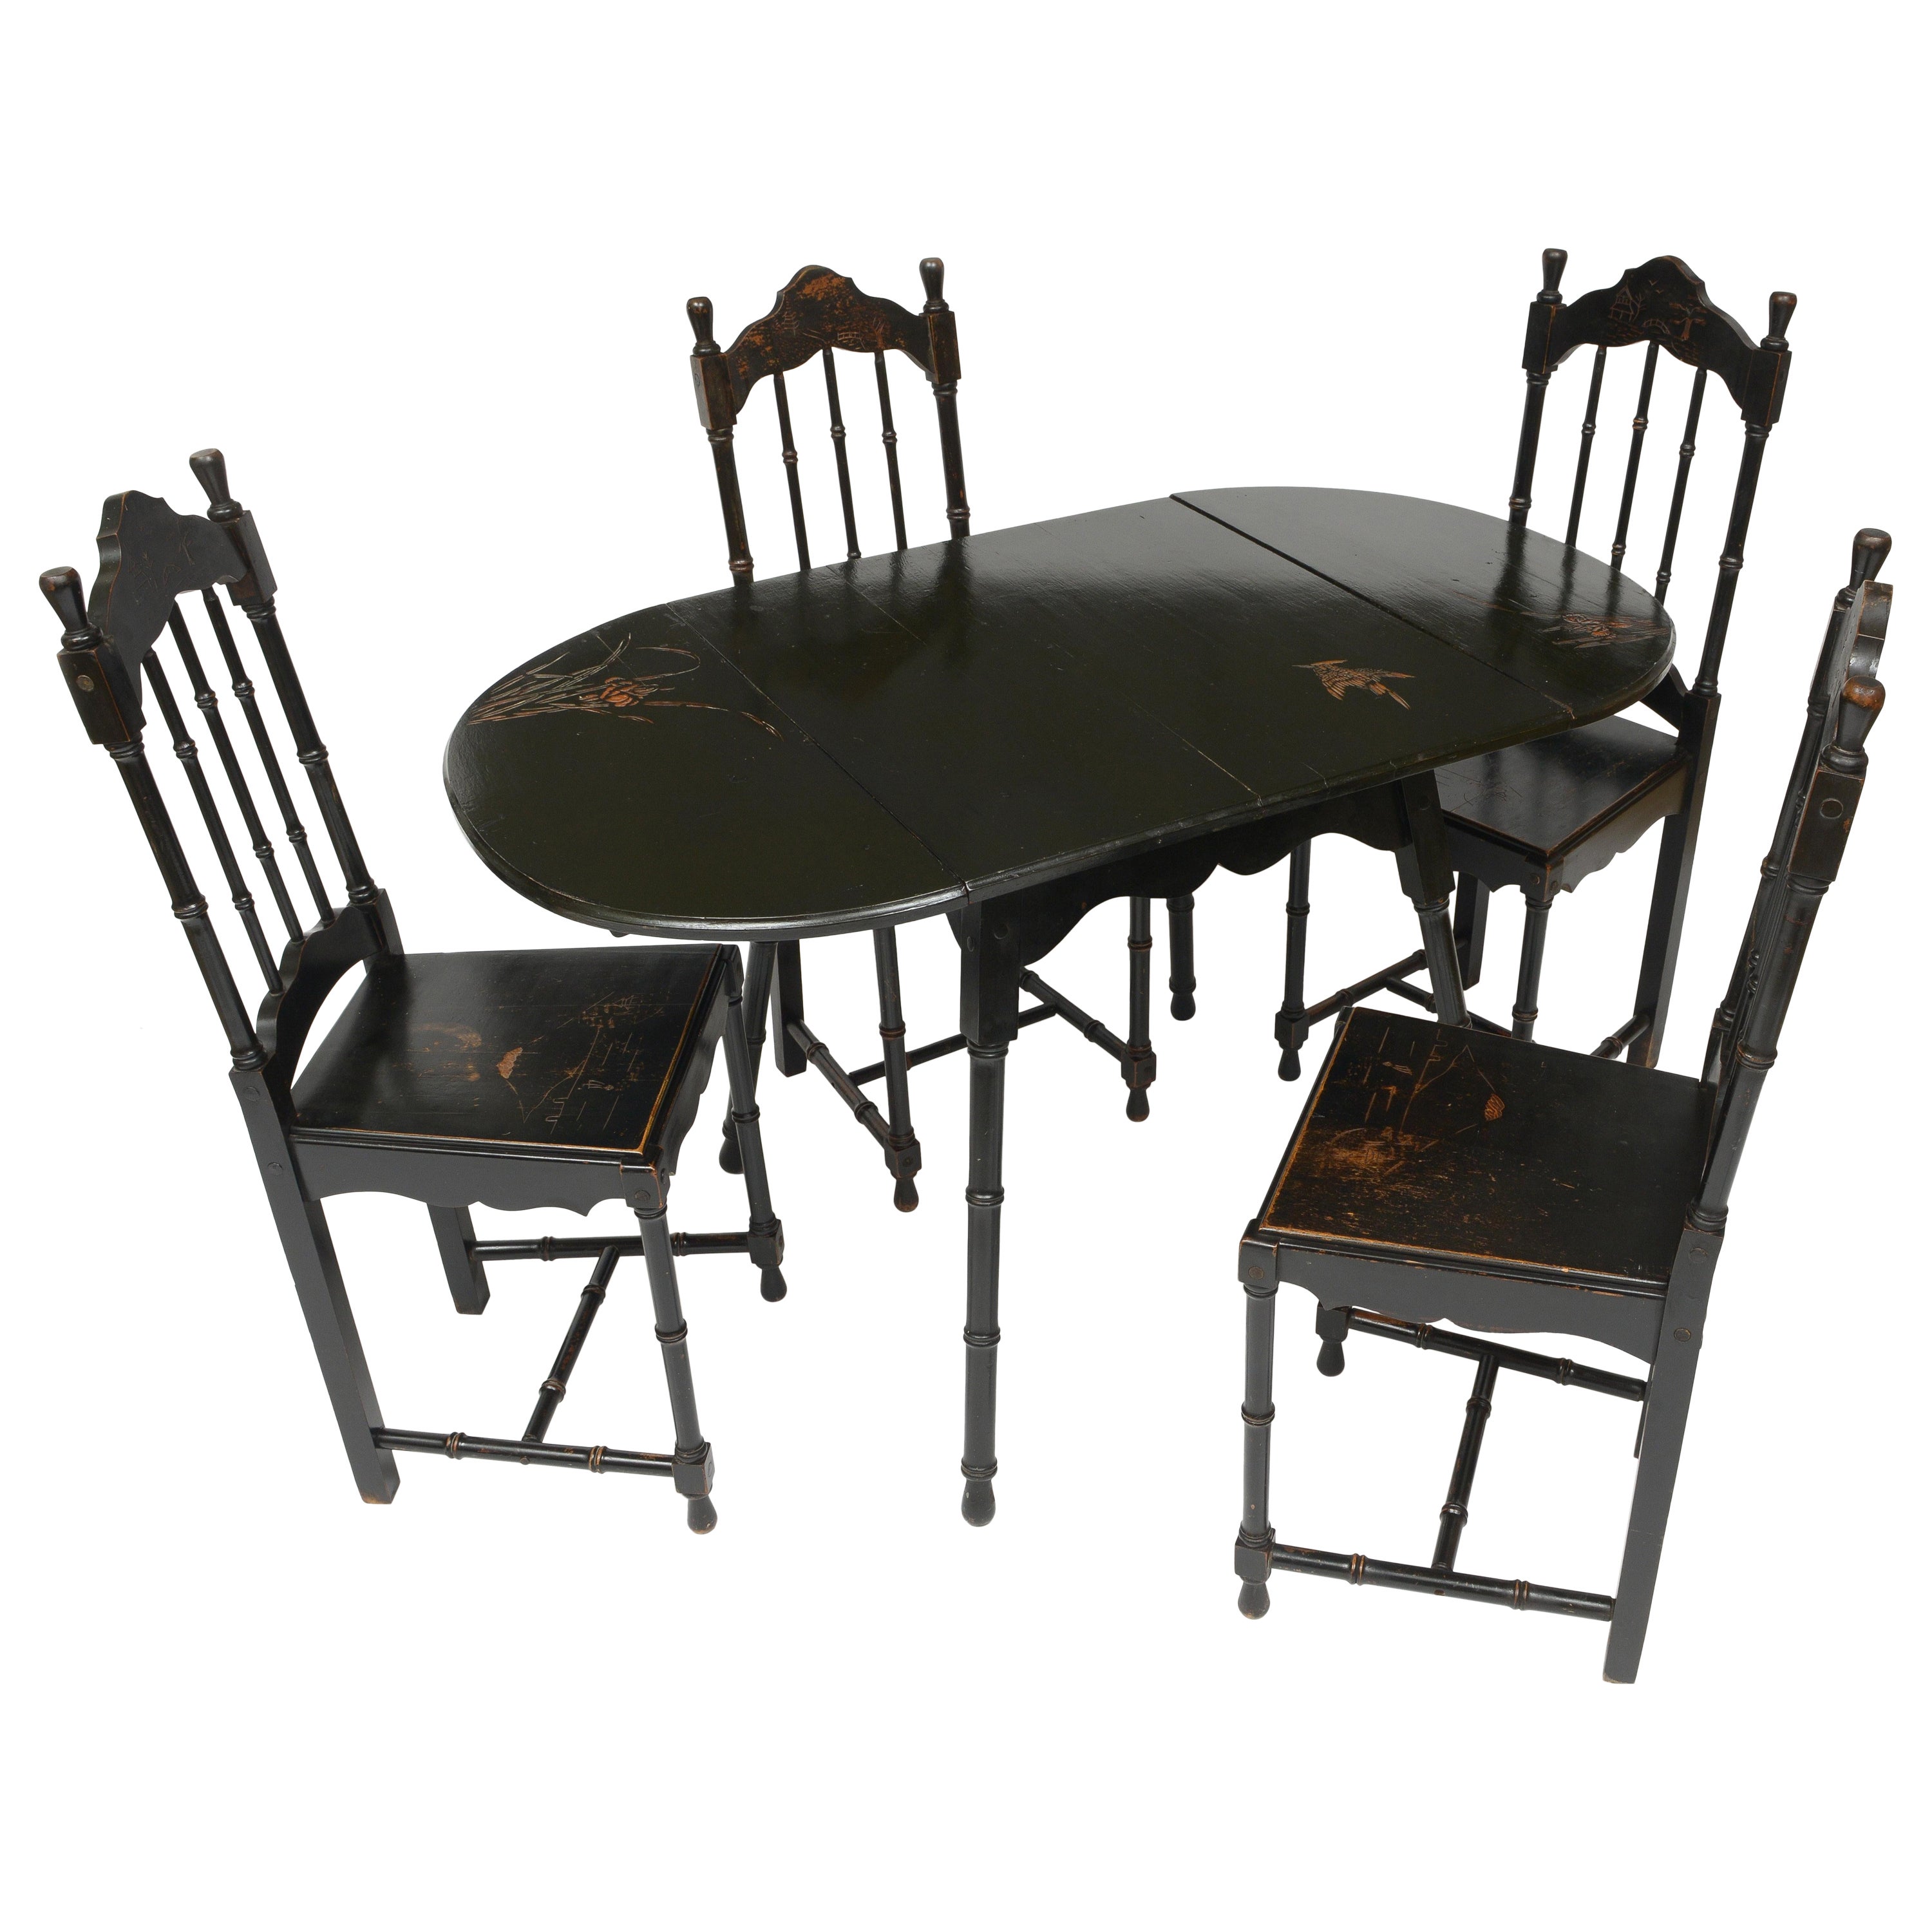 Late 19th Century Japanese Tea Table With Four Chairs - Set of 5 For Sale